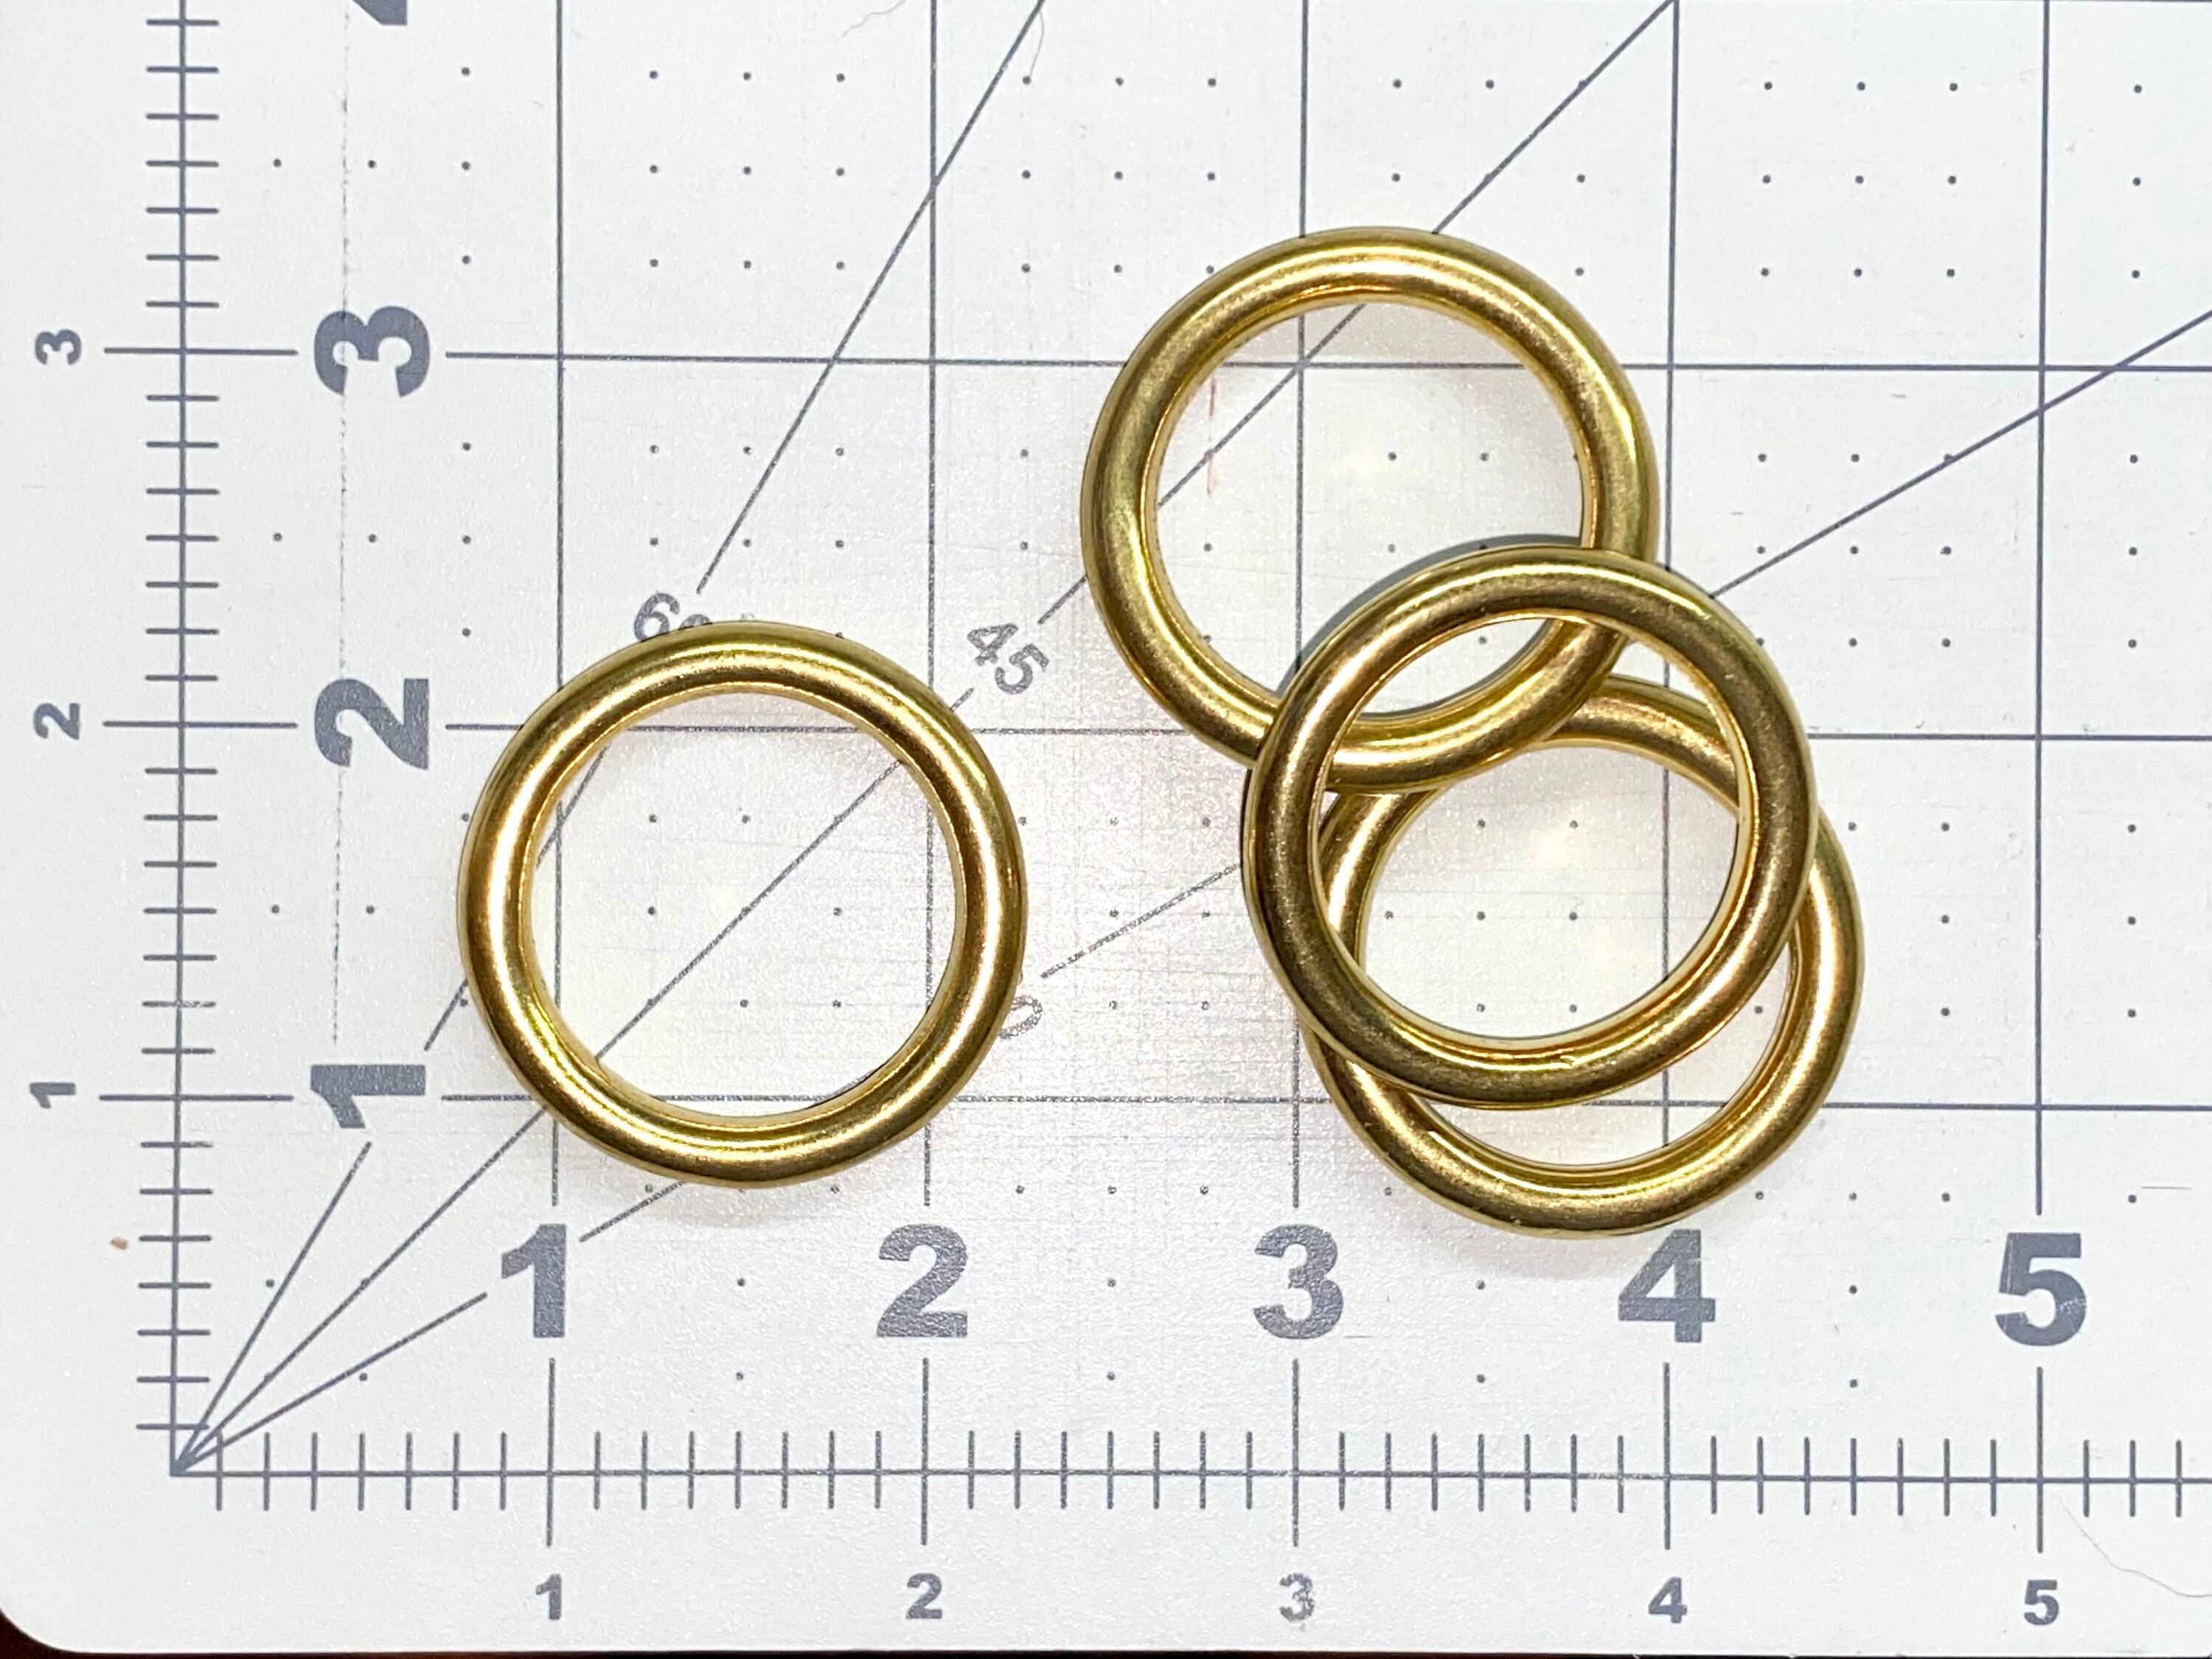 Solid Brass D-Ring for Leather Goods, Handbags, Dog Collars, Accessories & More | Natural Brass | 1 1/4 inch (B7025-1E-BOCR2-LL)